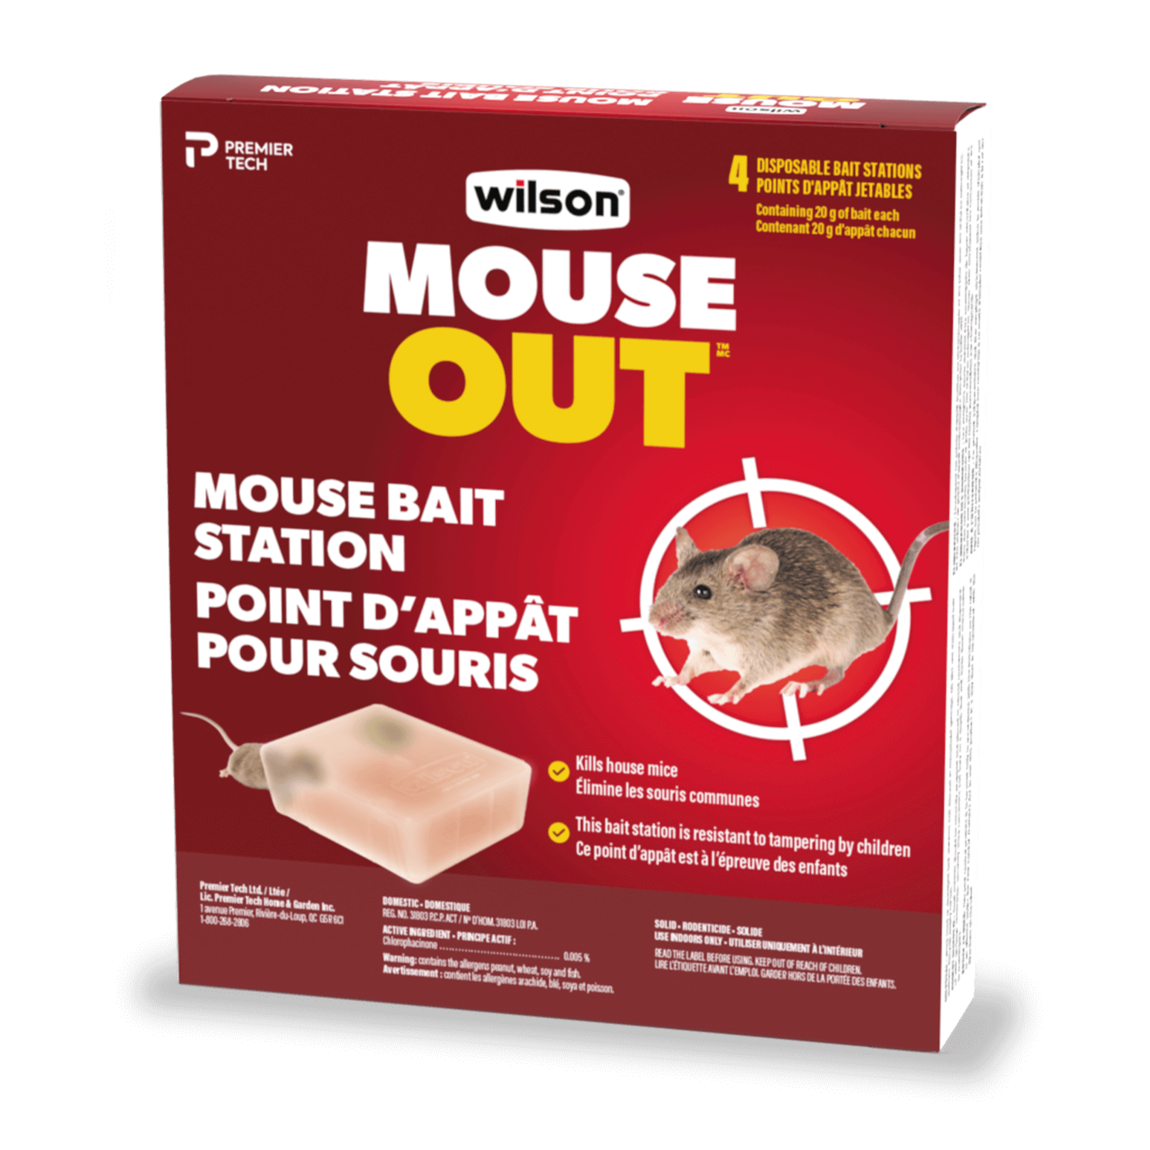 2 Pcs Smart Mouse Trap That Work No Kill Mice Catcher Indoor